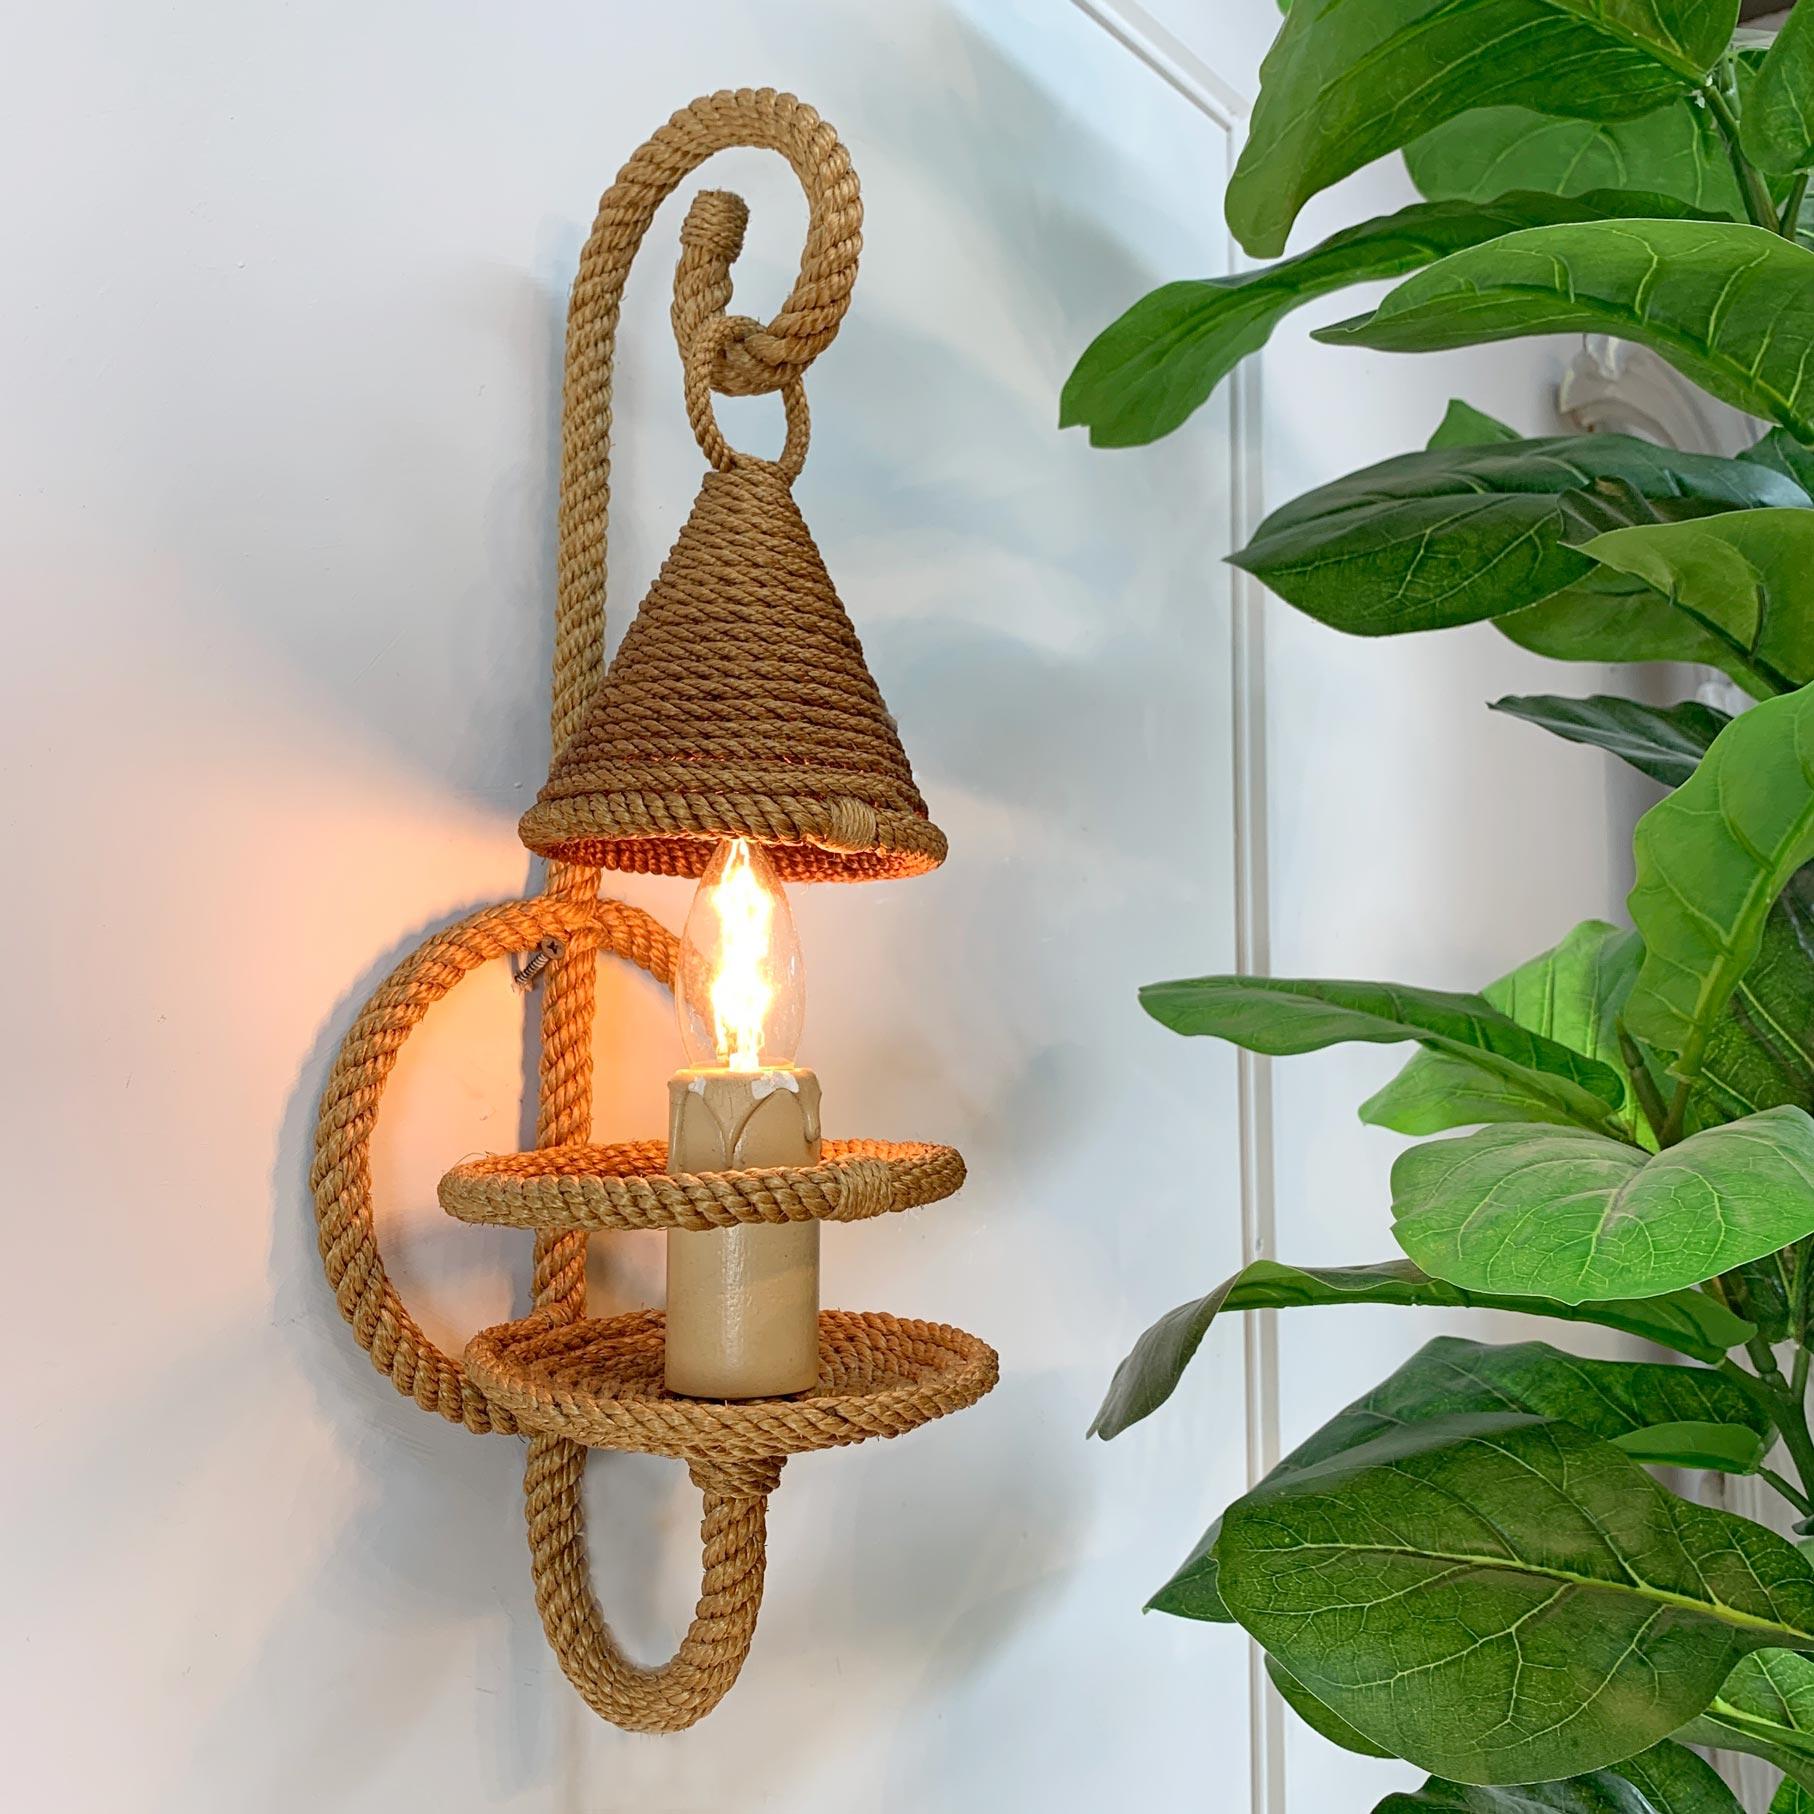 Hand crafted rope work wall light, probably by Adrian Audoux and Frida Minet, dating to the 1950's

47cm Height, 16cm Depth, 16cm Width

The light takes a single large bayonet bulb